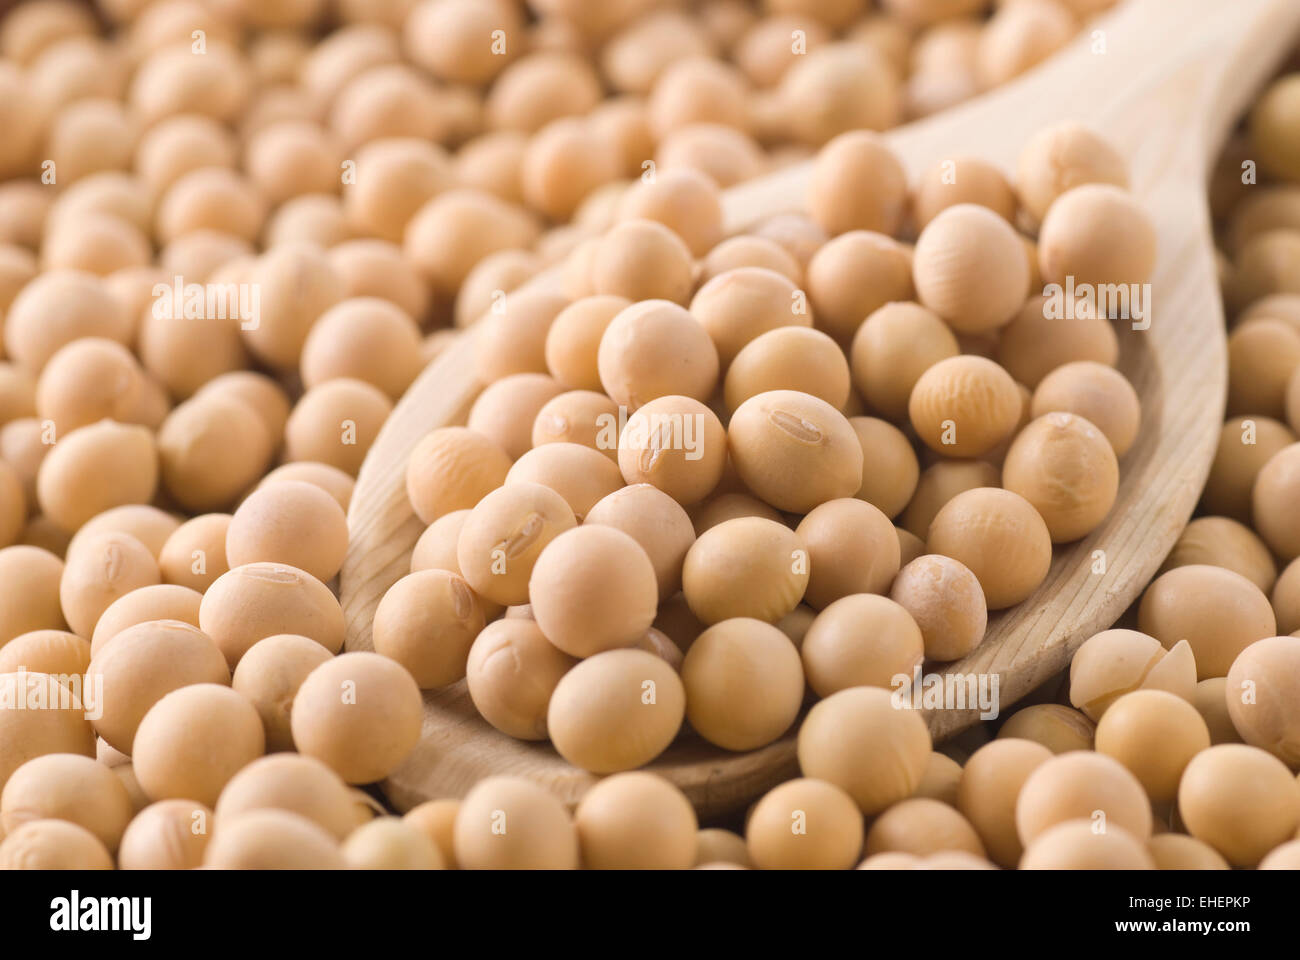 Dried soy beans in a wooden spoon. Stock Photo